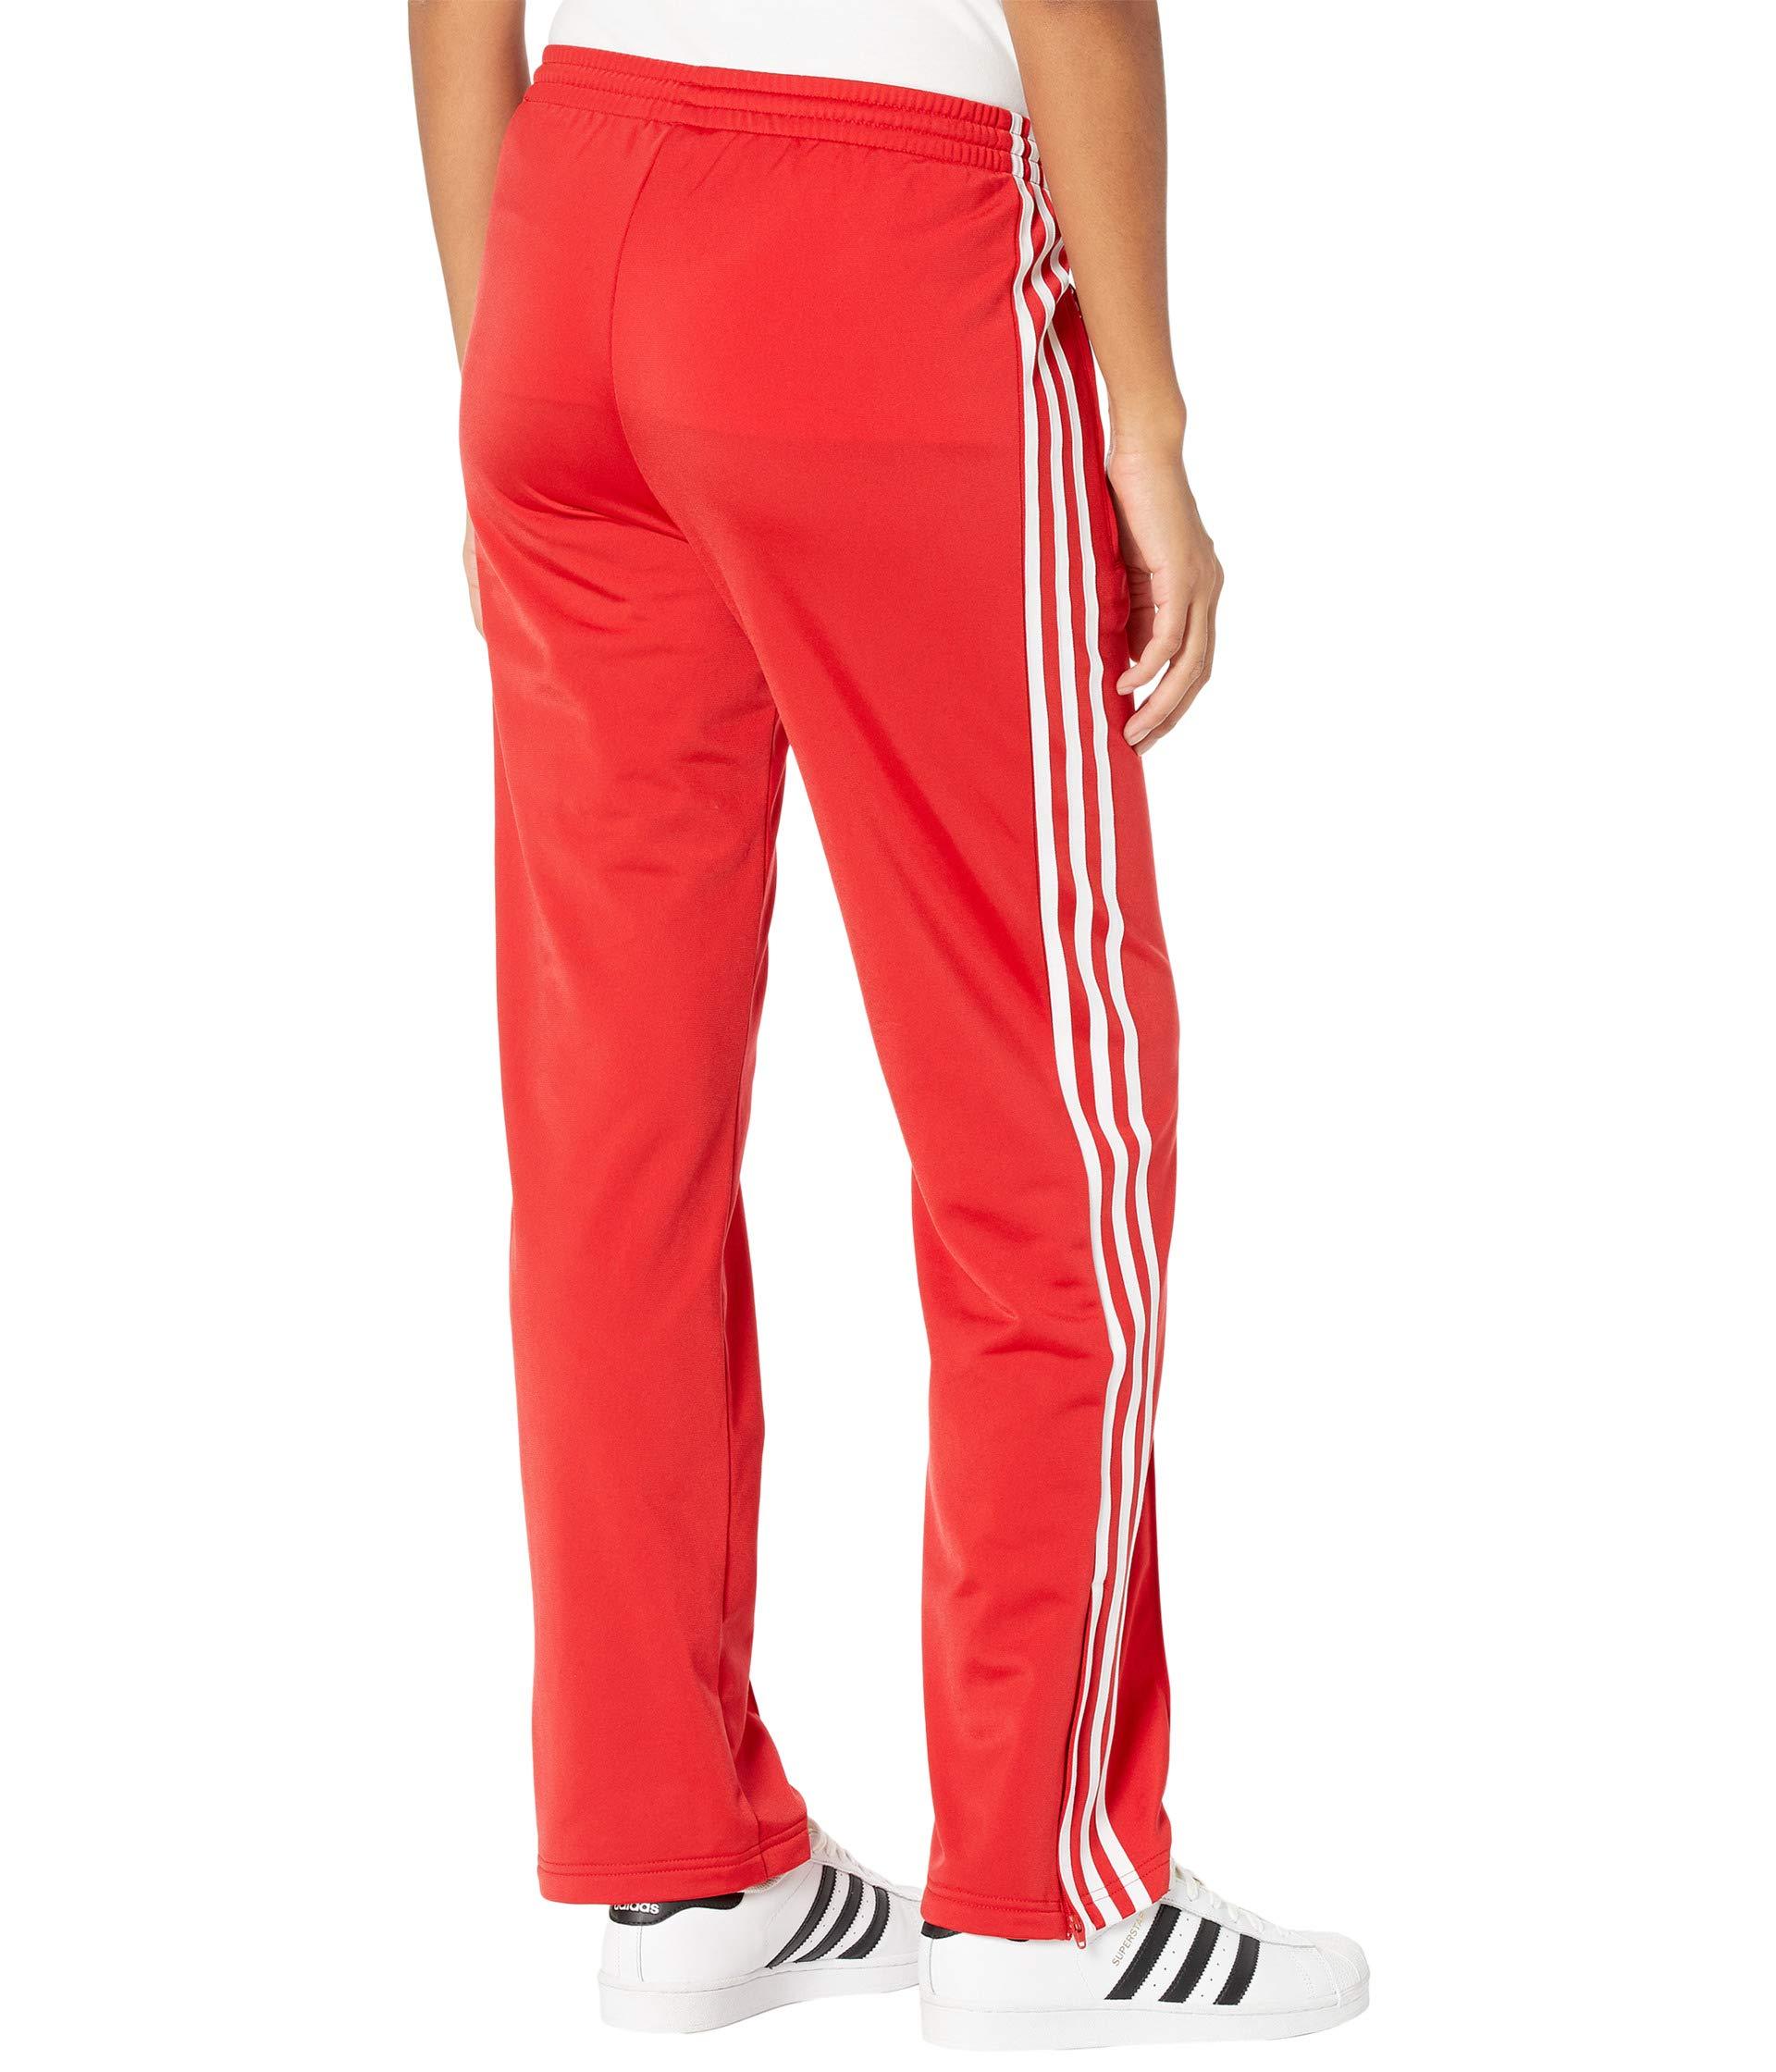 adidas Originals Synthetic Primeblue Firebird Track Pants, Varsity-striped  Pattern in Scarlet (Red) - Save 12% - Lyst